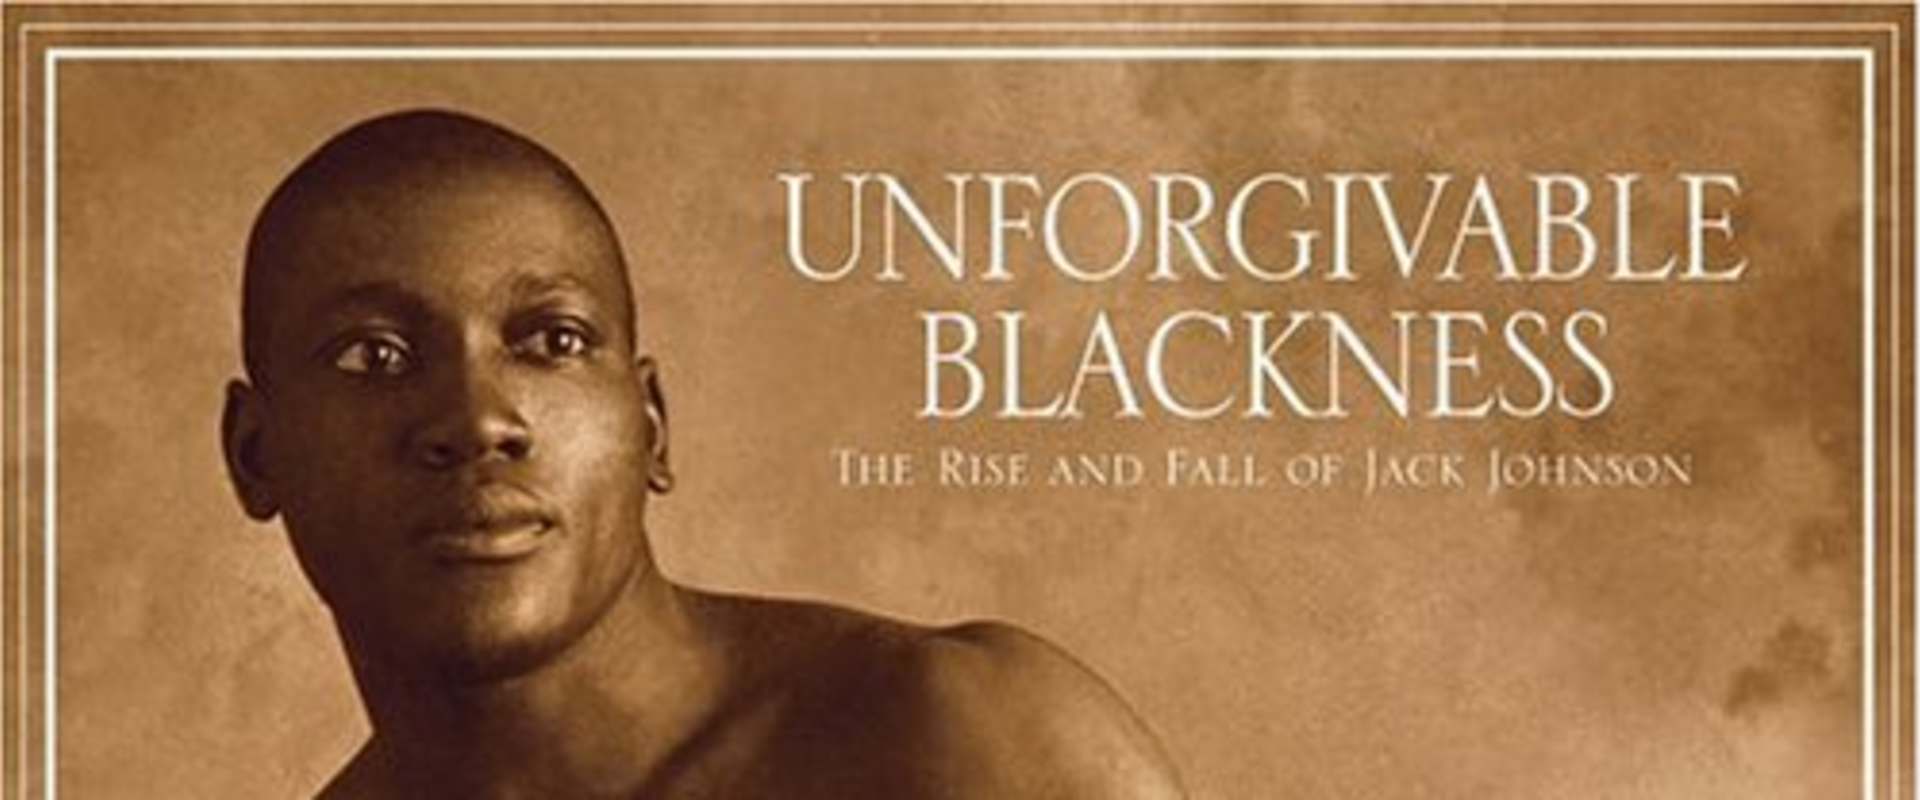 Unforgivable Blackness: The Rise and Fall of Jack Johnson background 2